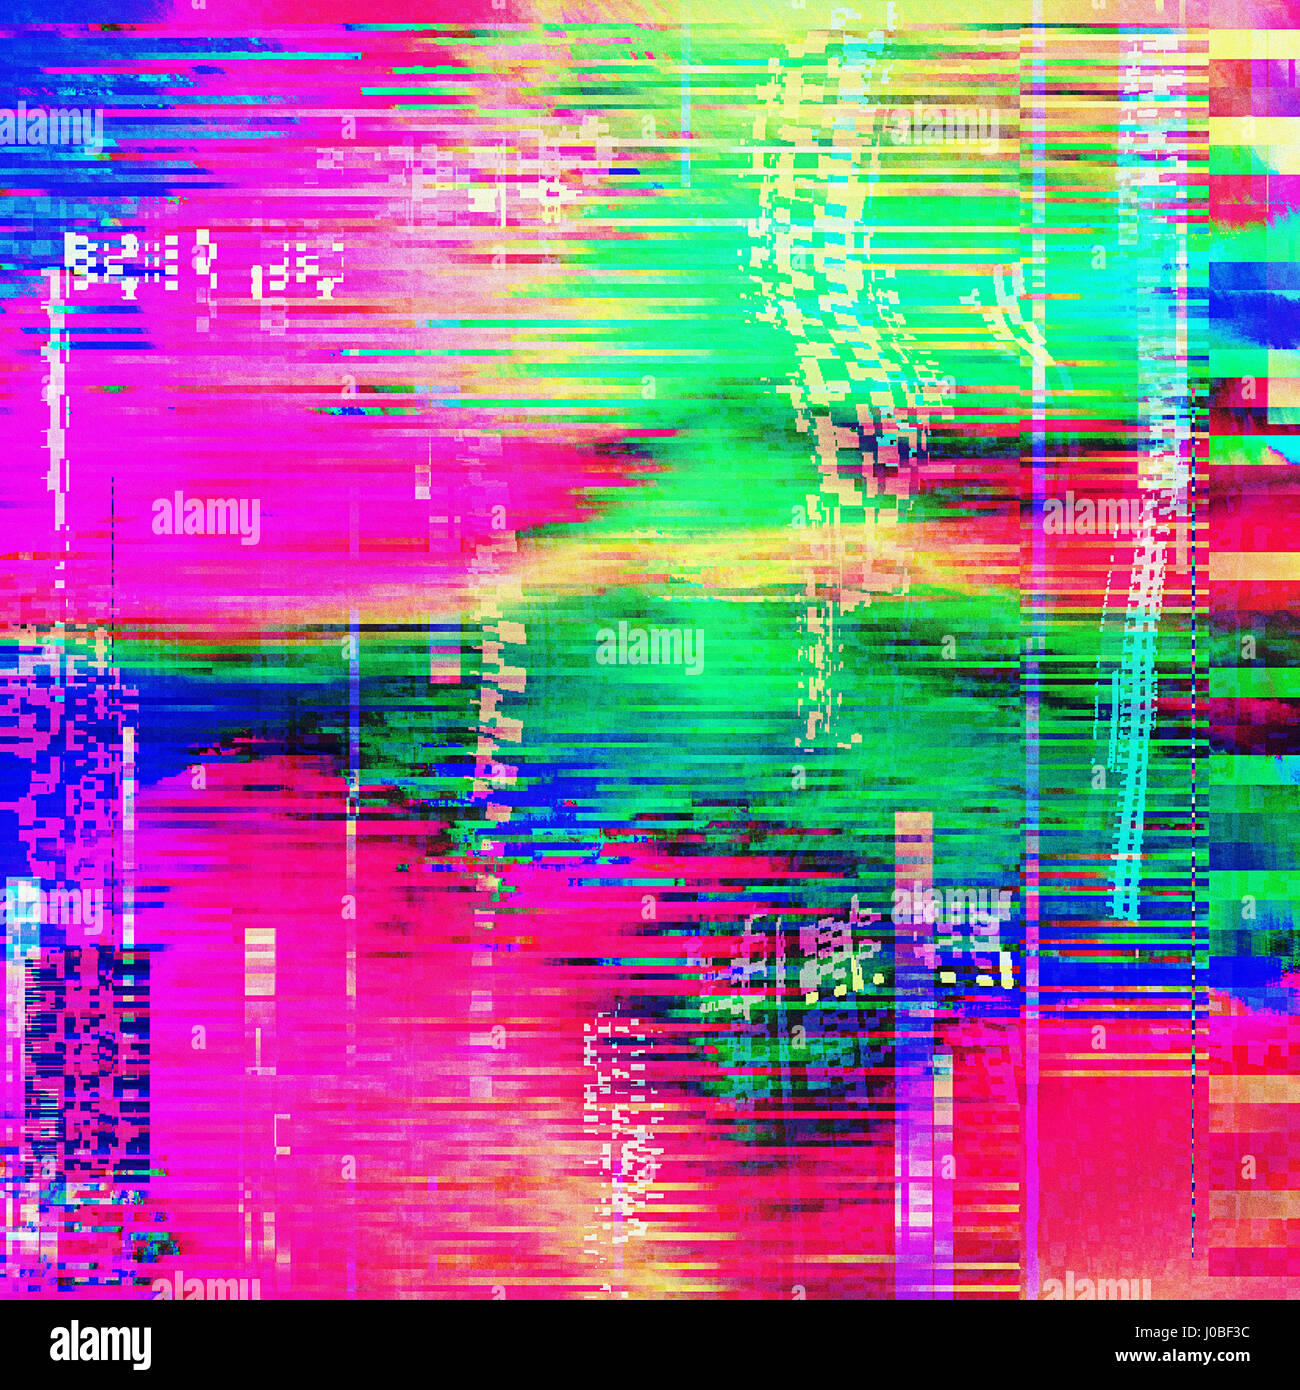 Download Glitch Effect Colorful Abstract Wallpaper